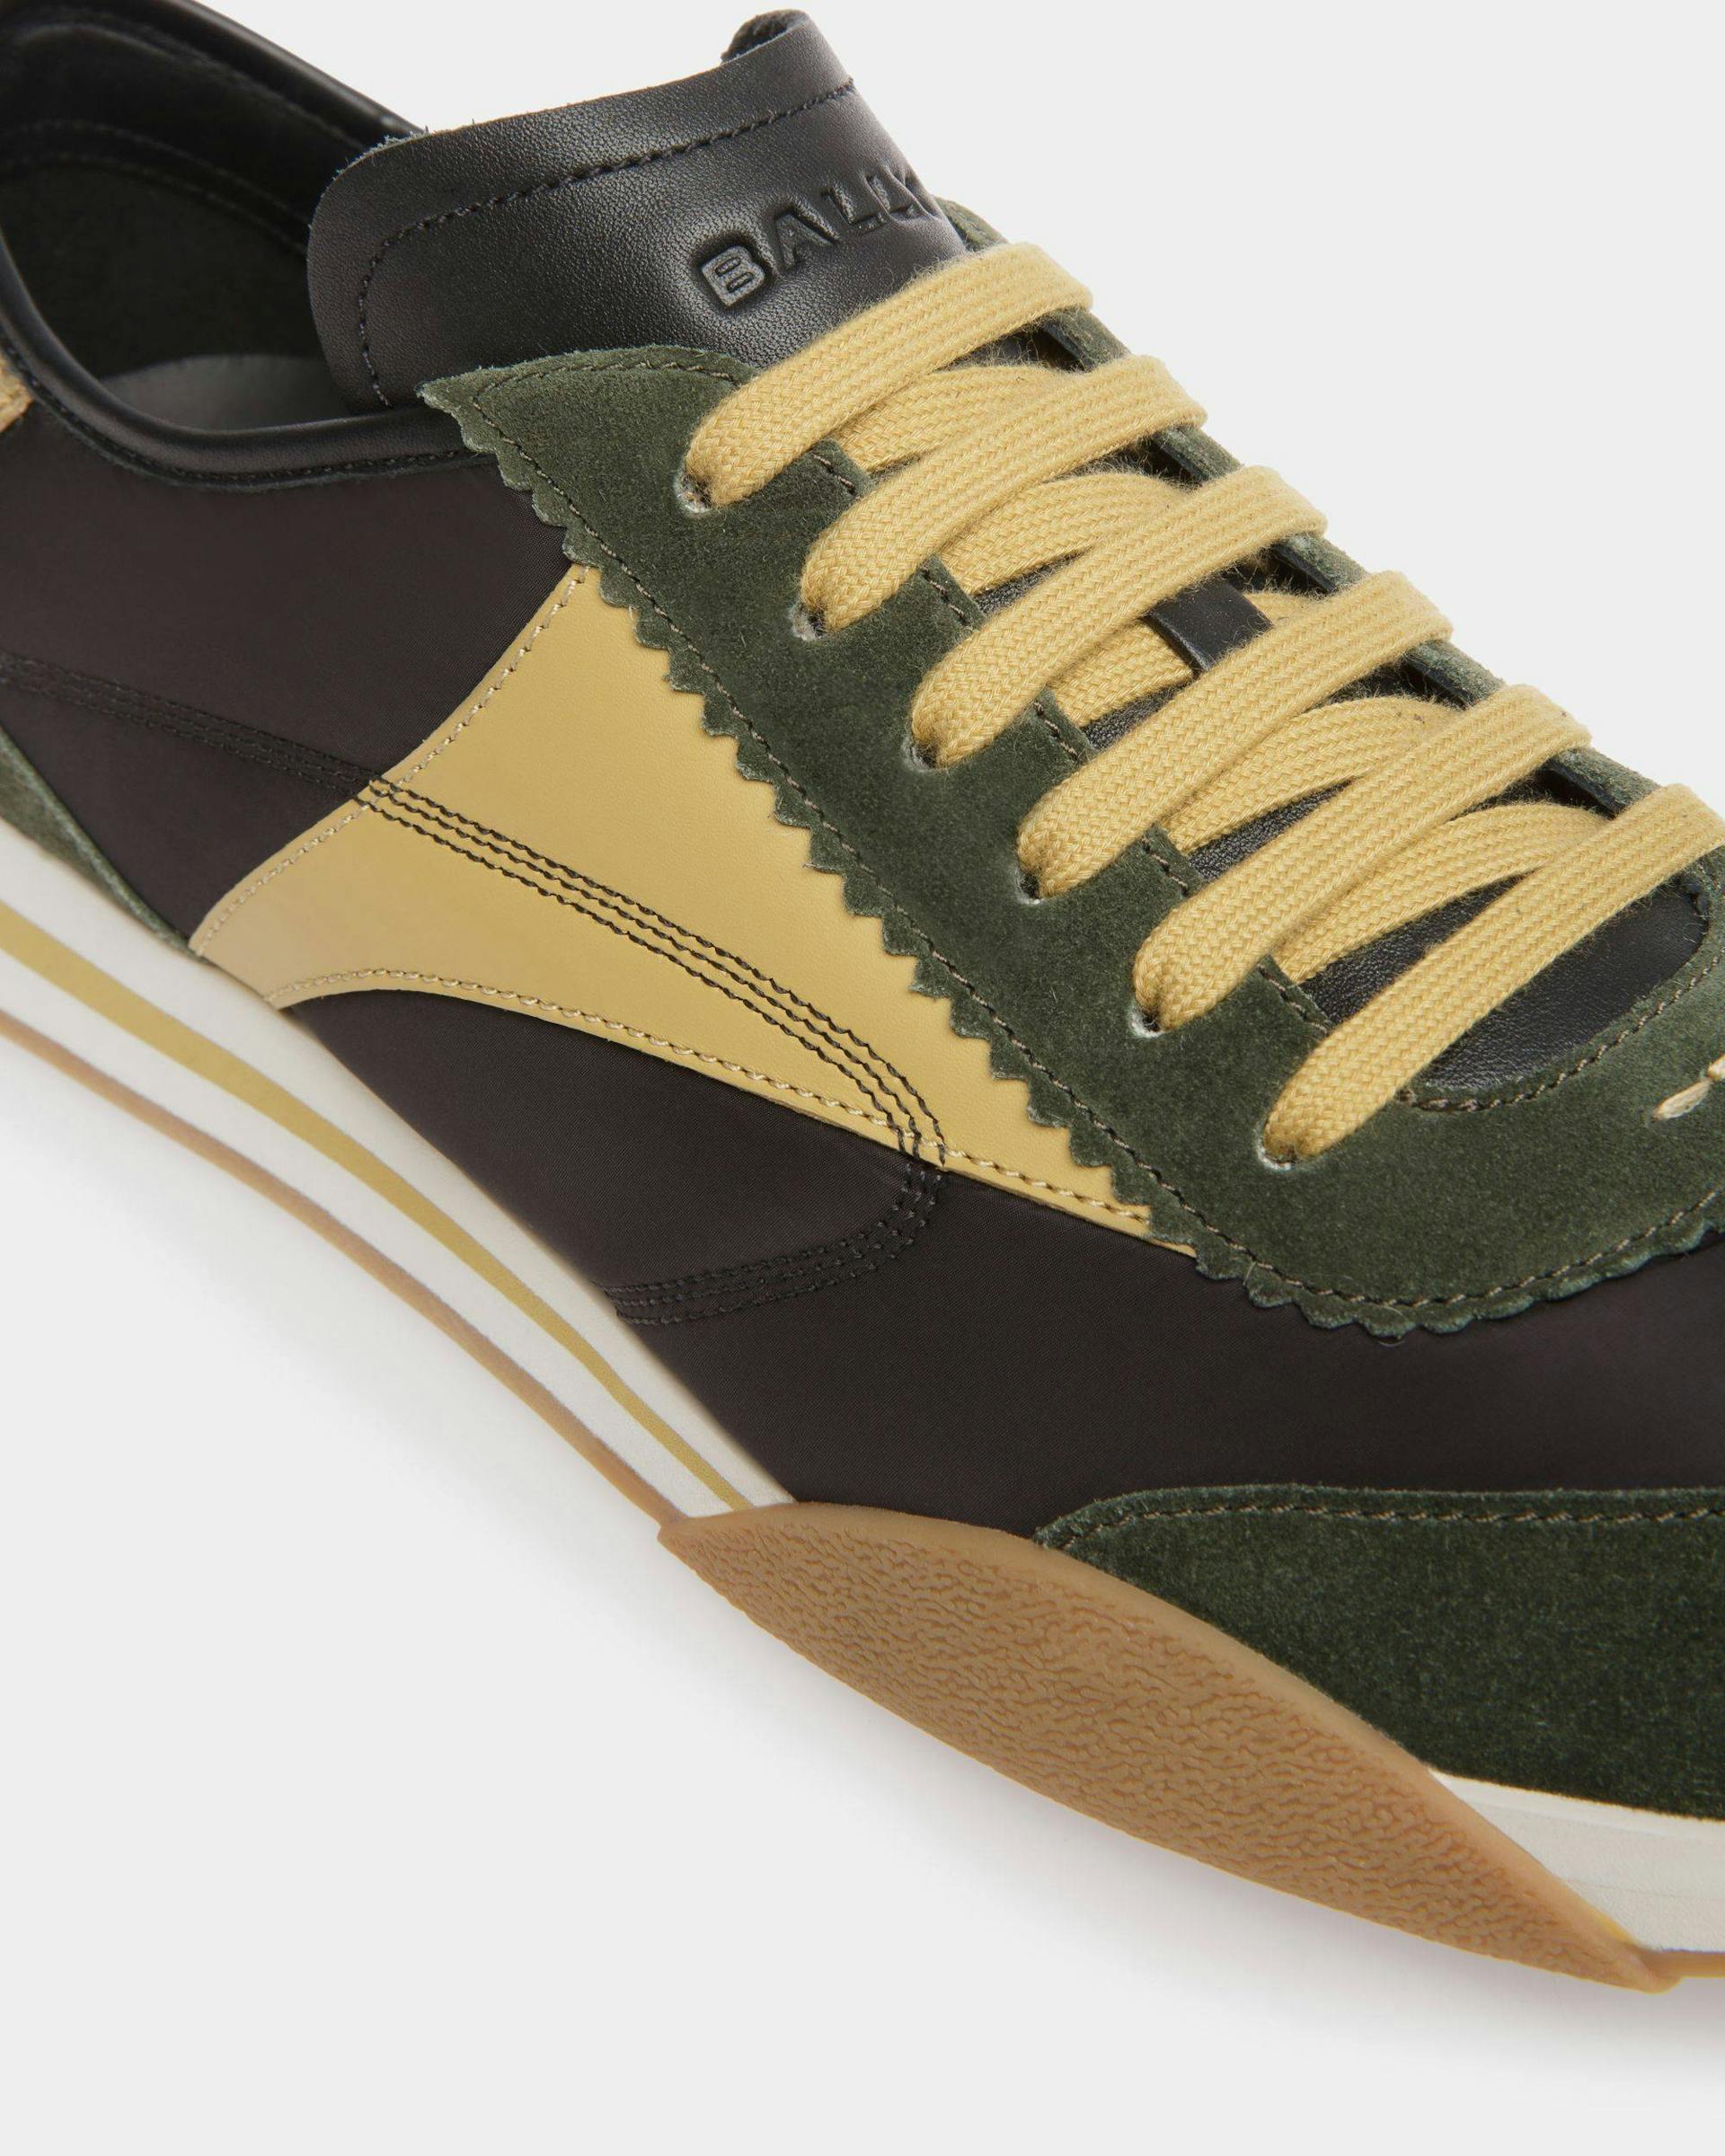 Sussex Sneakers In Green And Black Leather And Fabric - Men's - Bally - 06